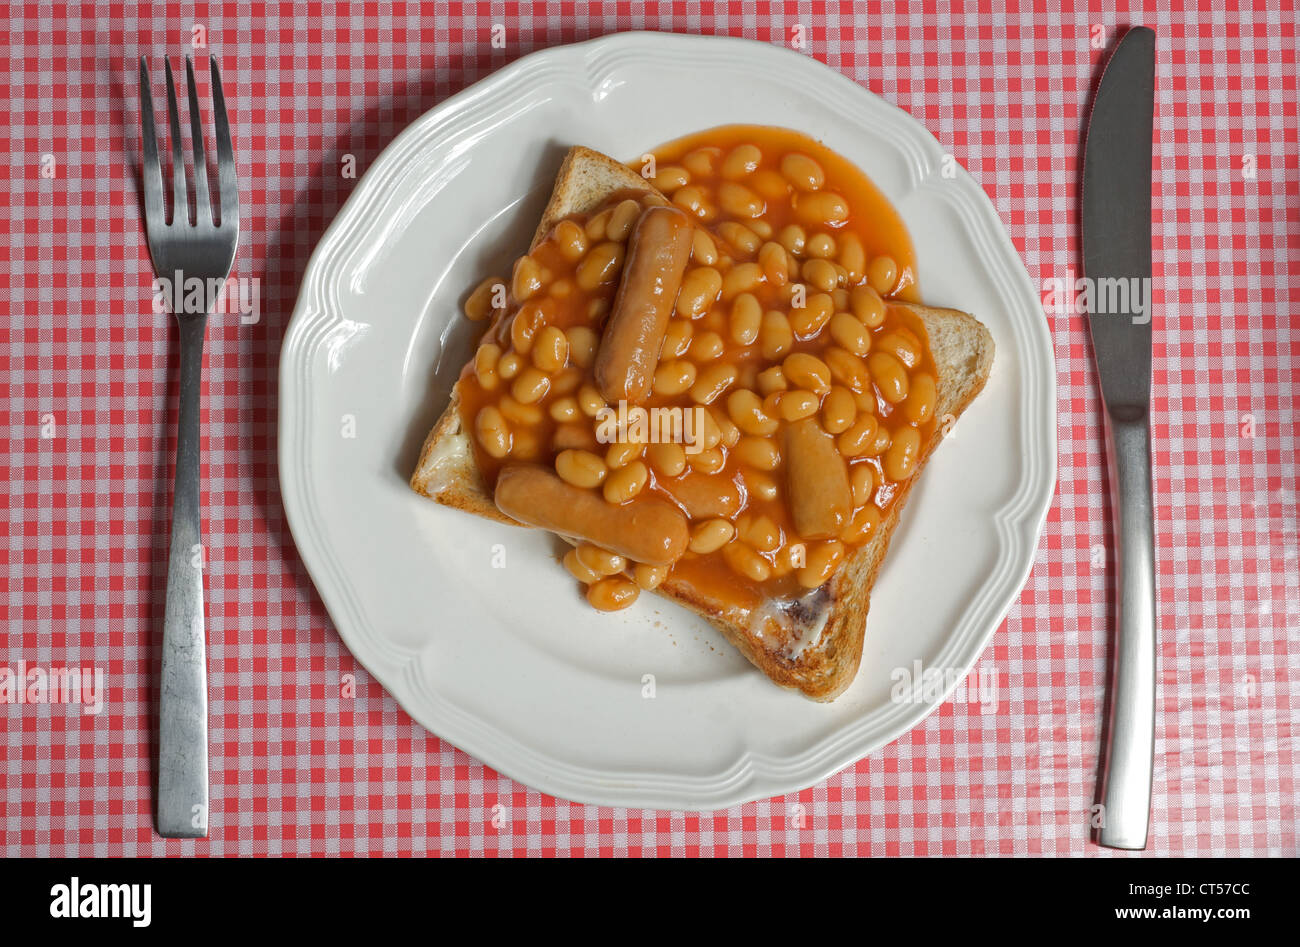 Heinz baked beans with pork sausages on toast Stock Photo